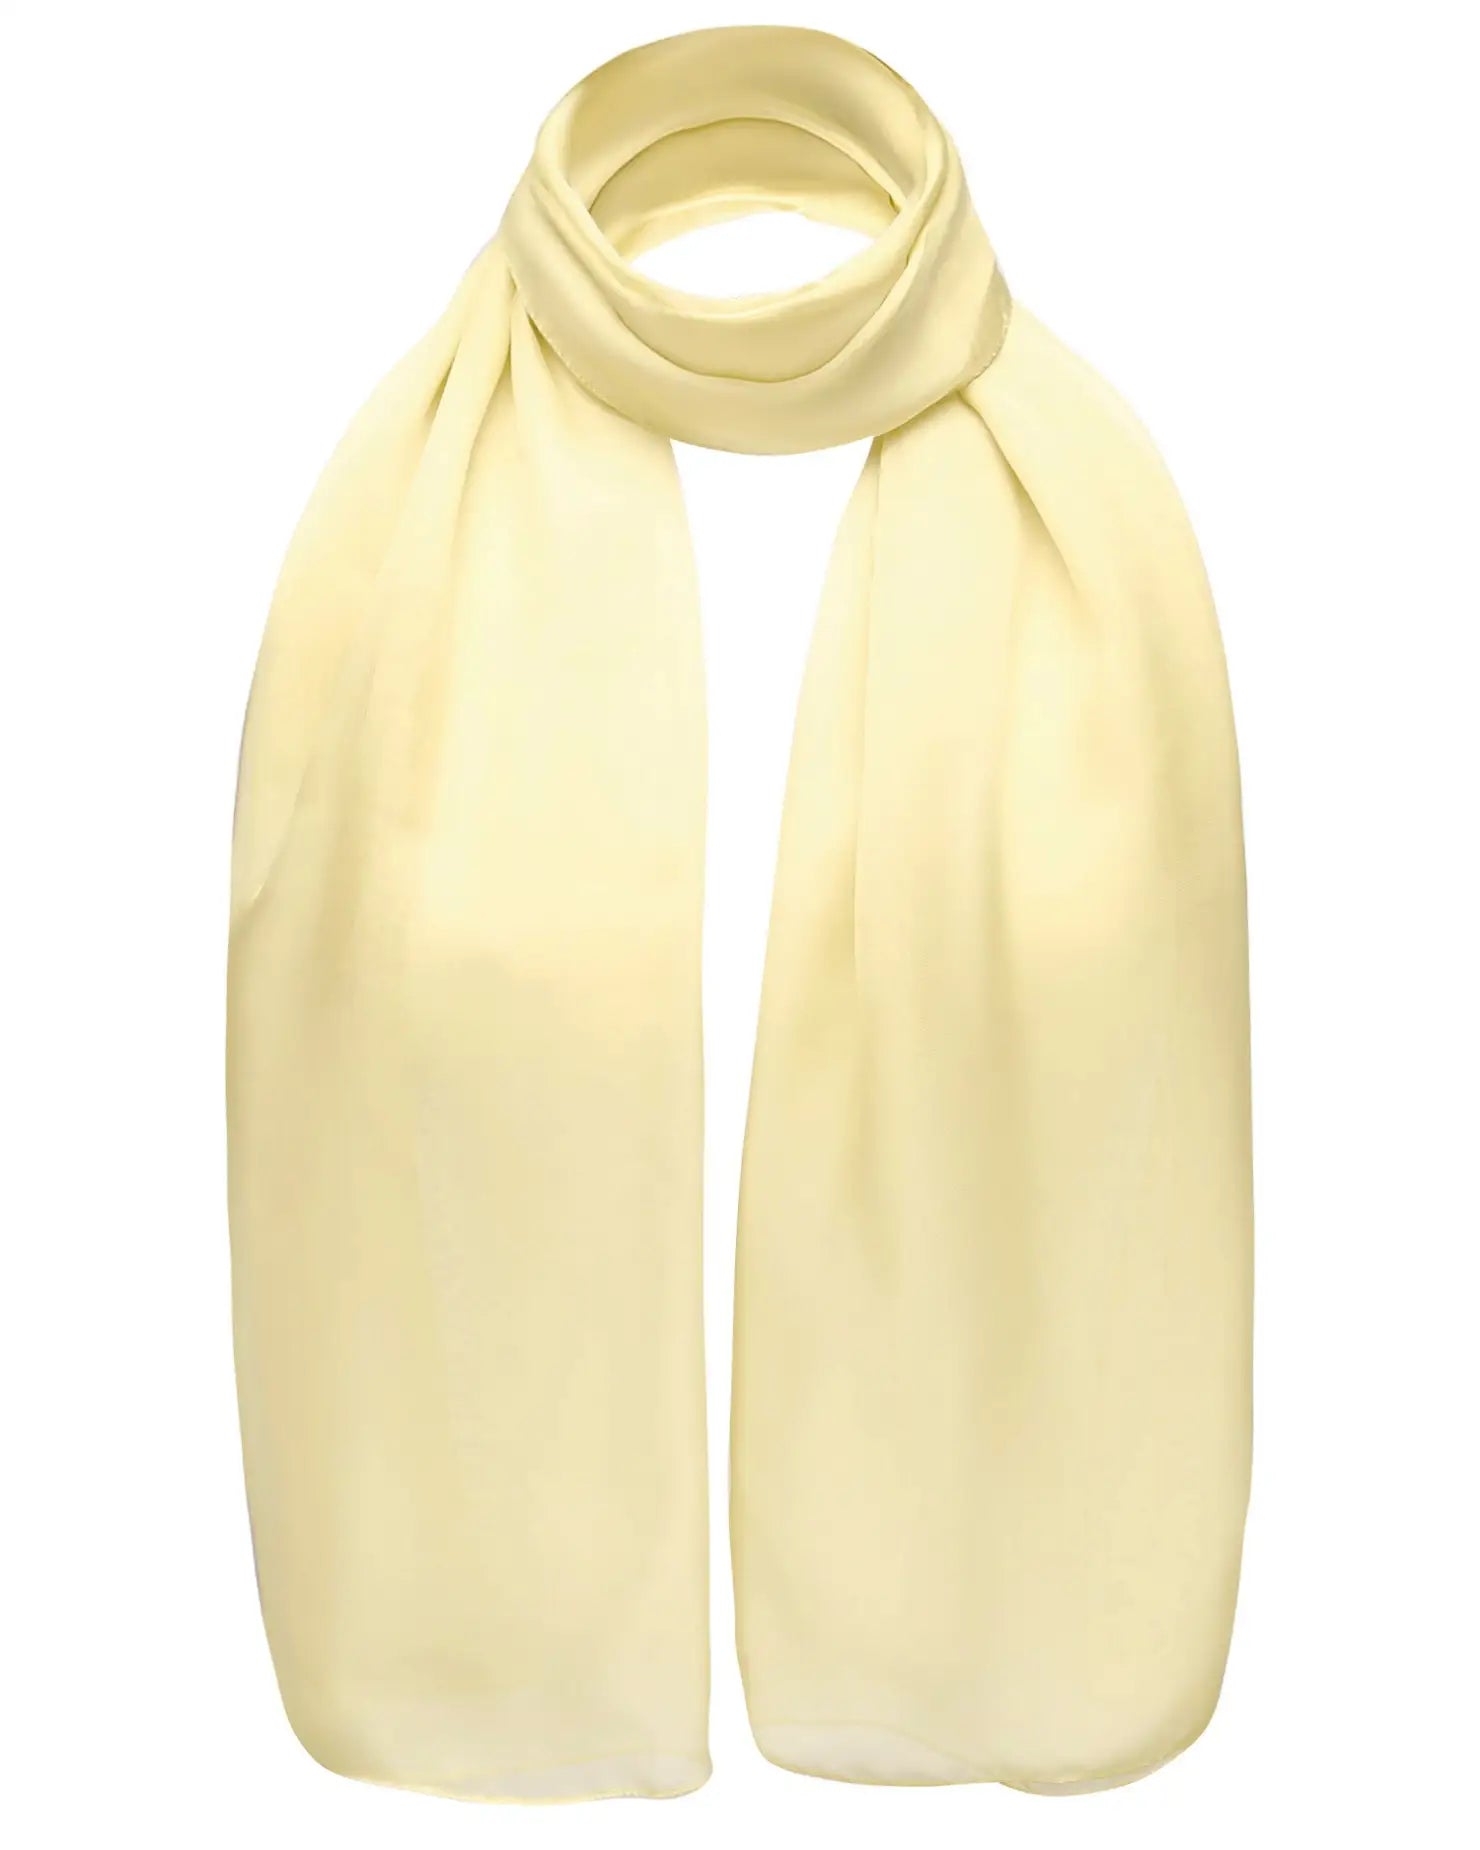 Classic Plain Chiffon Scarf in Yellow Color on White Background